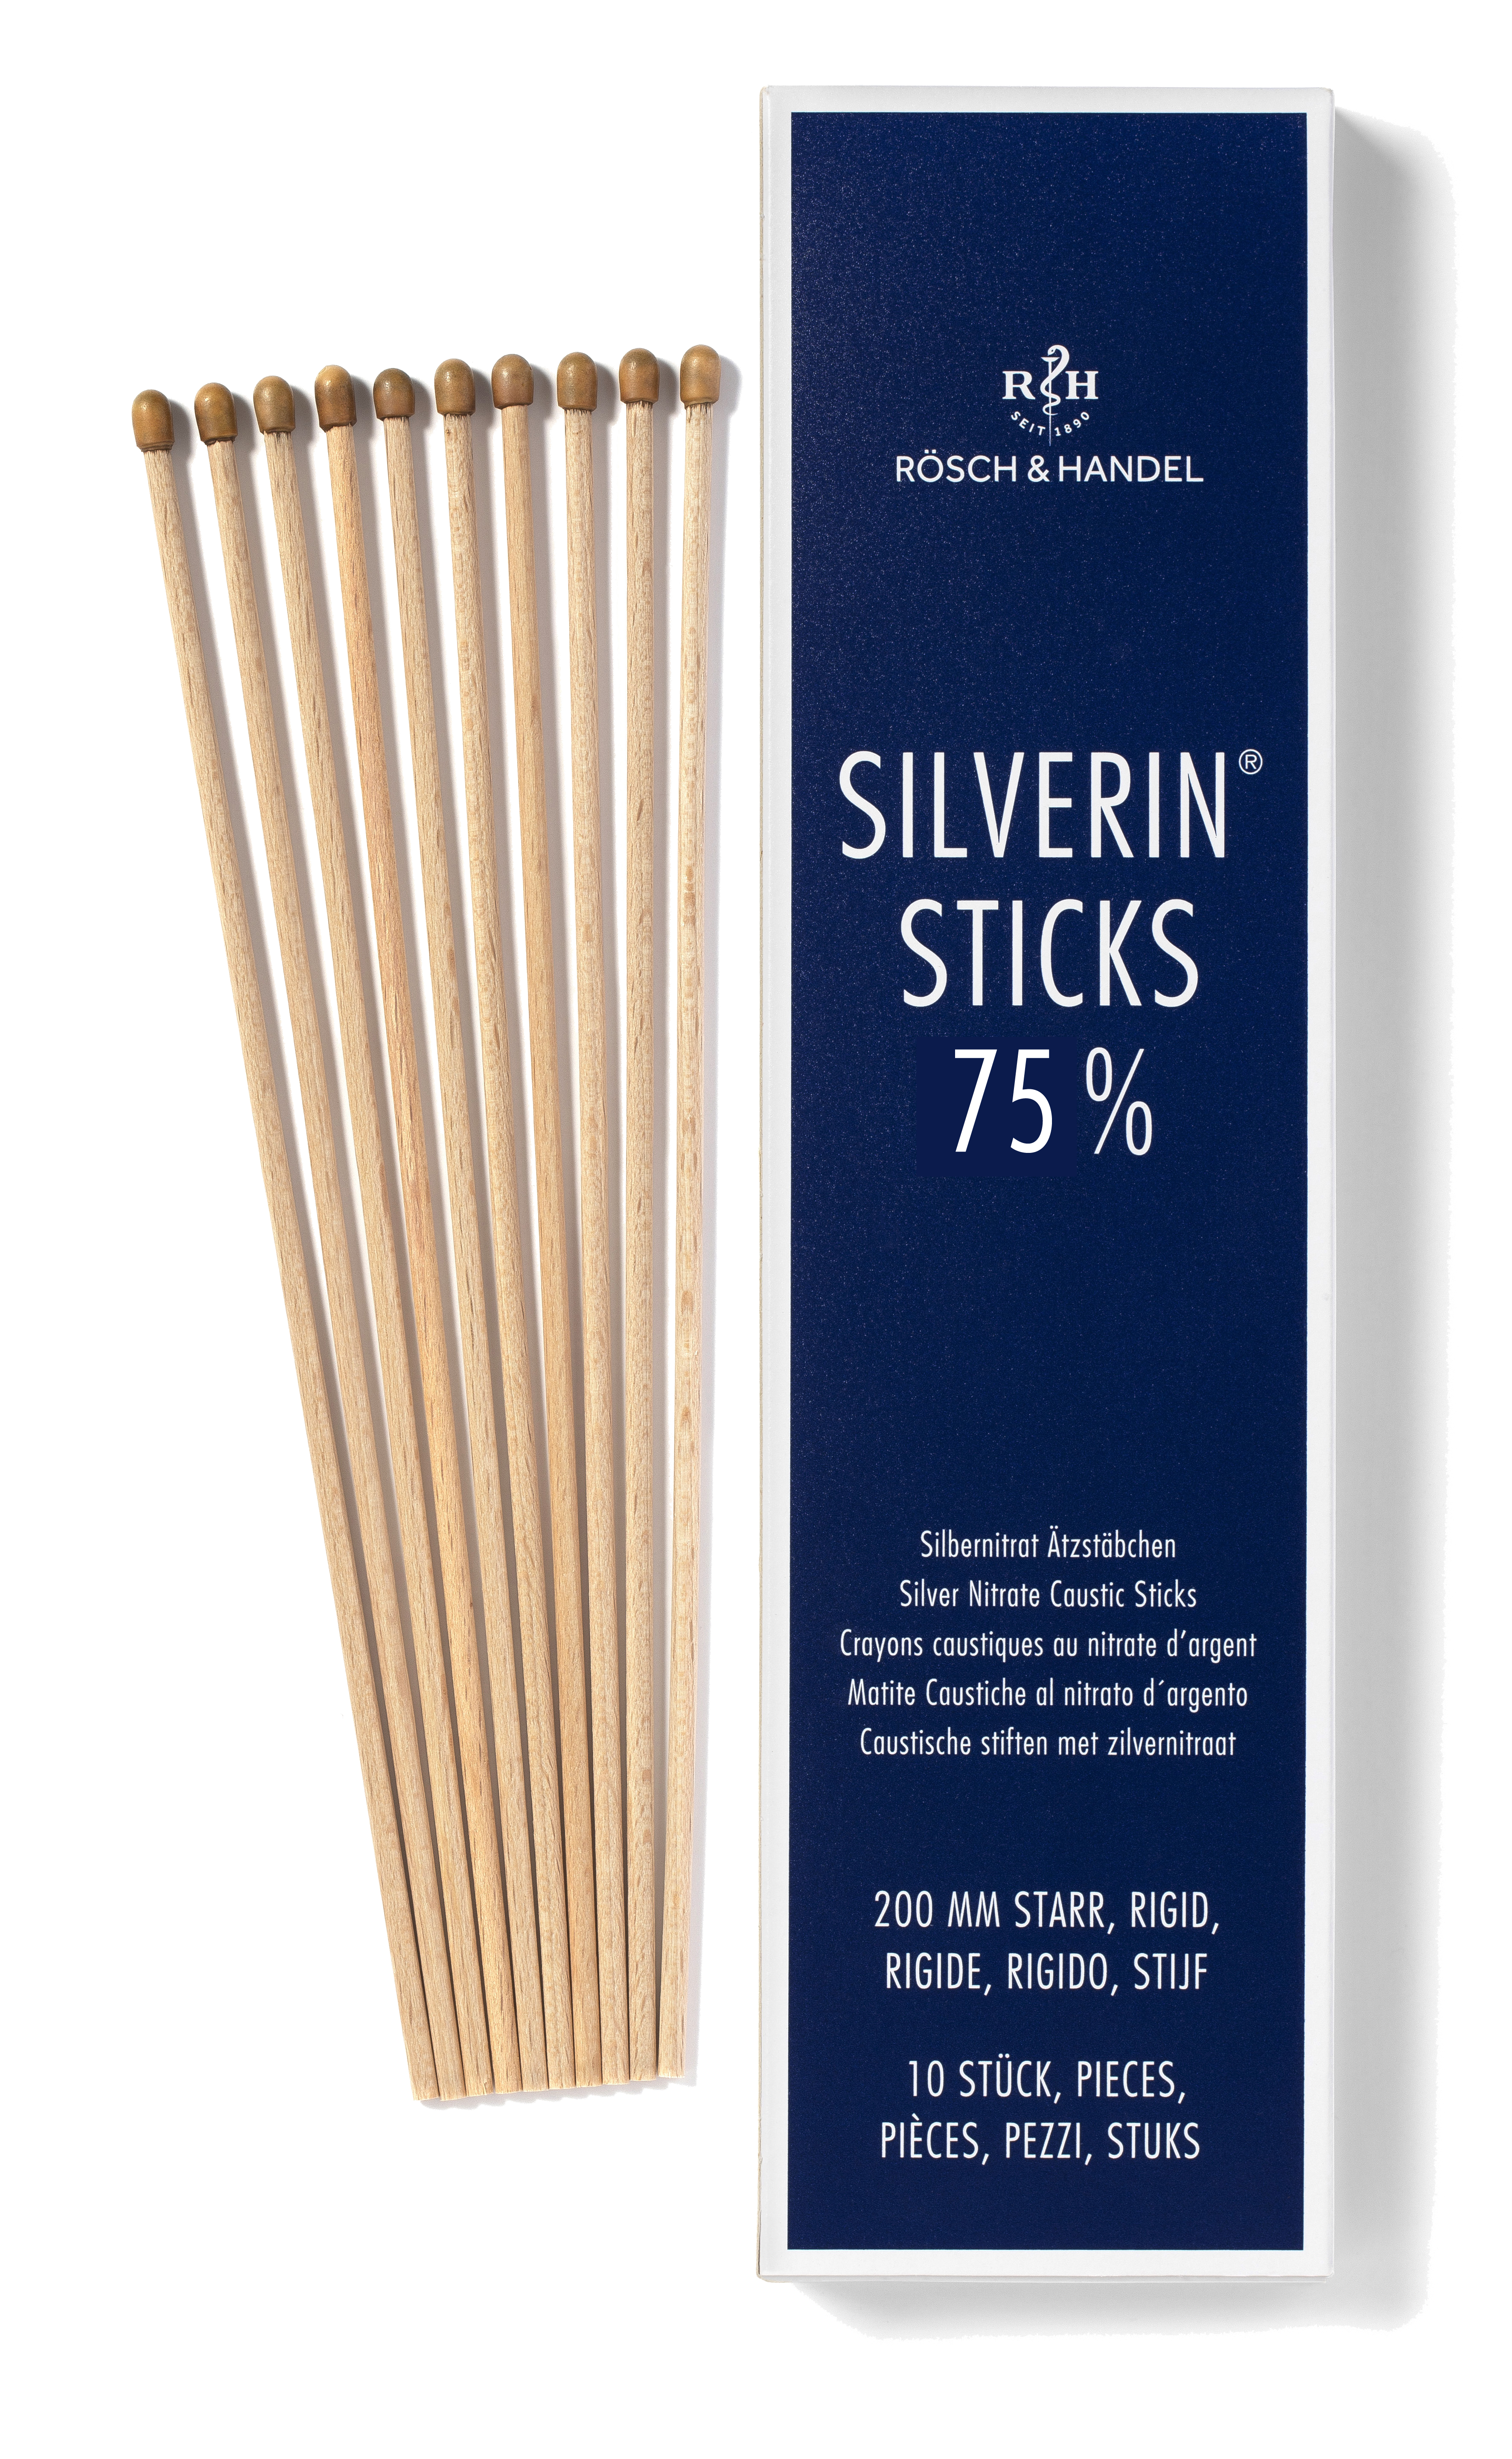 SILVERIN STICKS 75% with silver nitrate